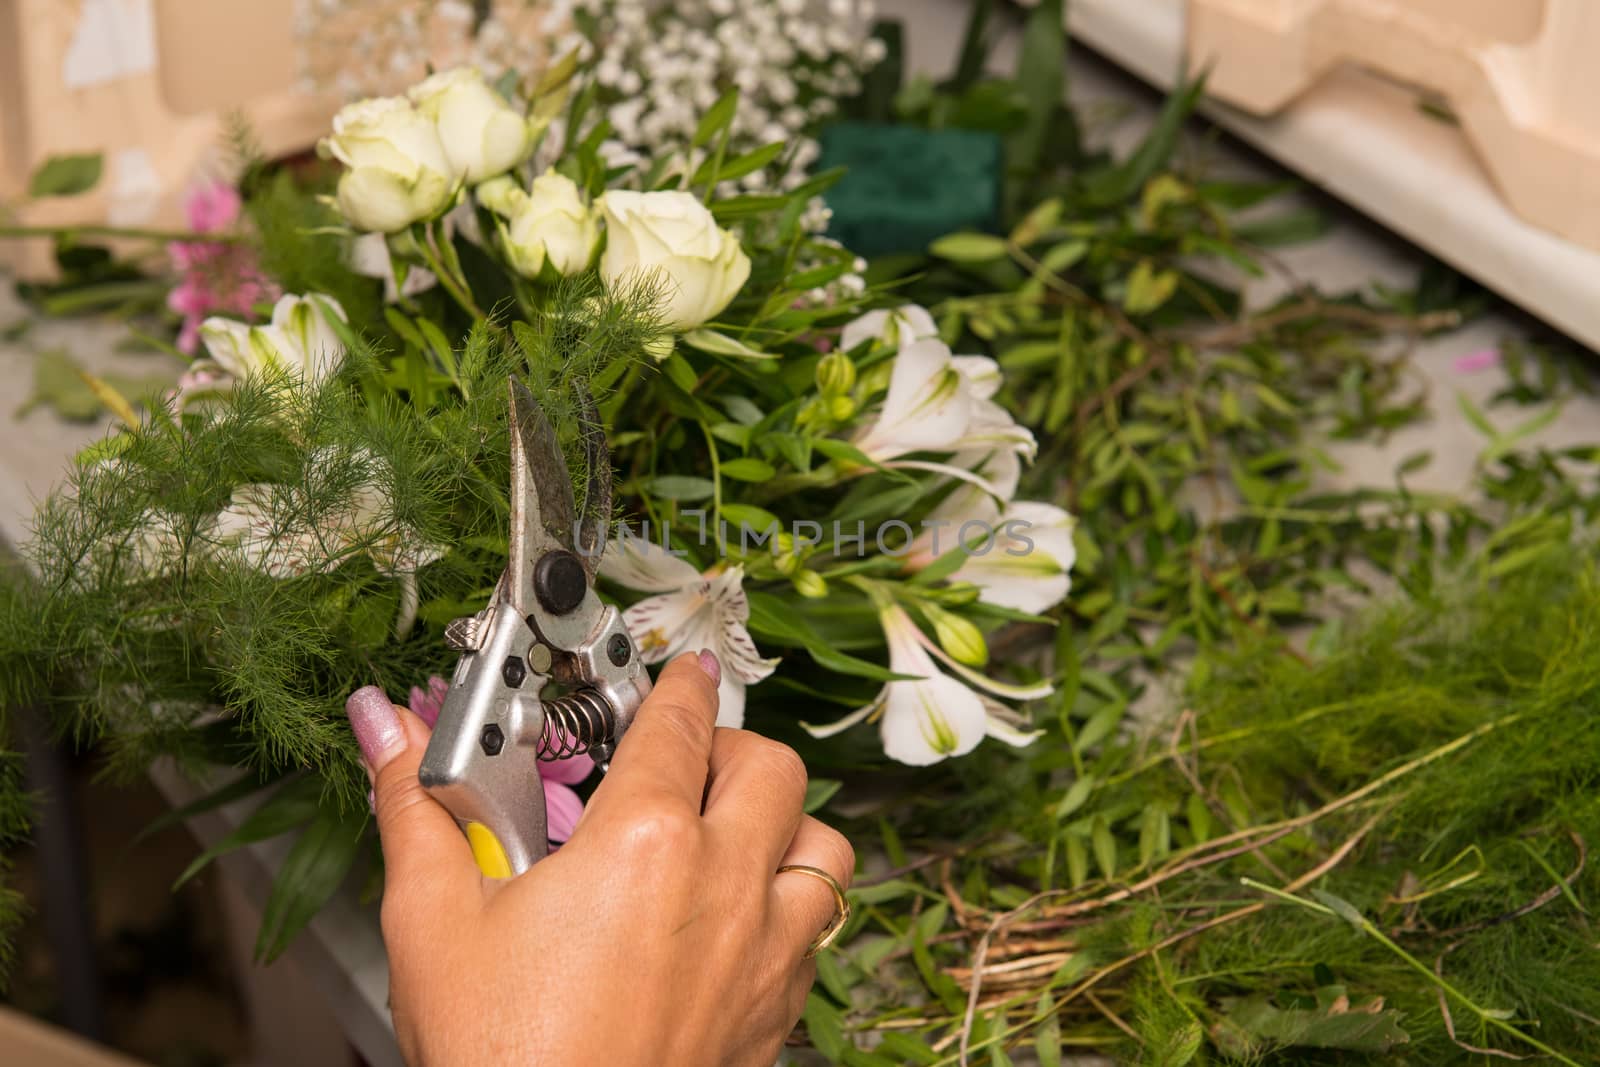 Florist female making a bouquet of different flowers at working table.